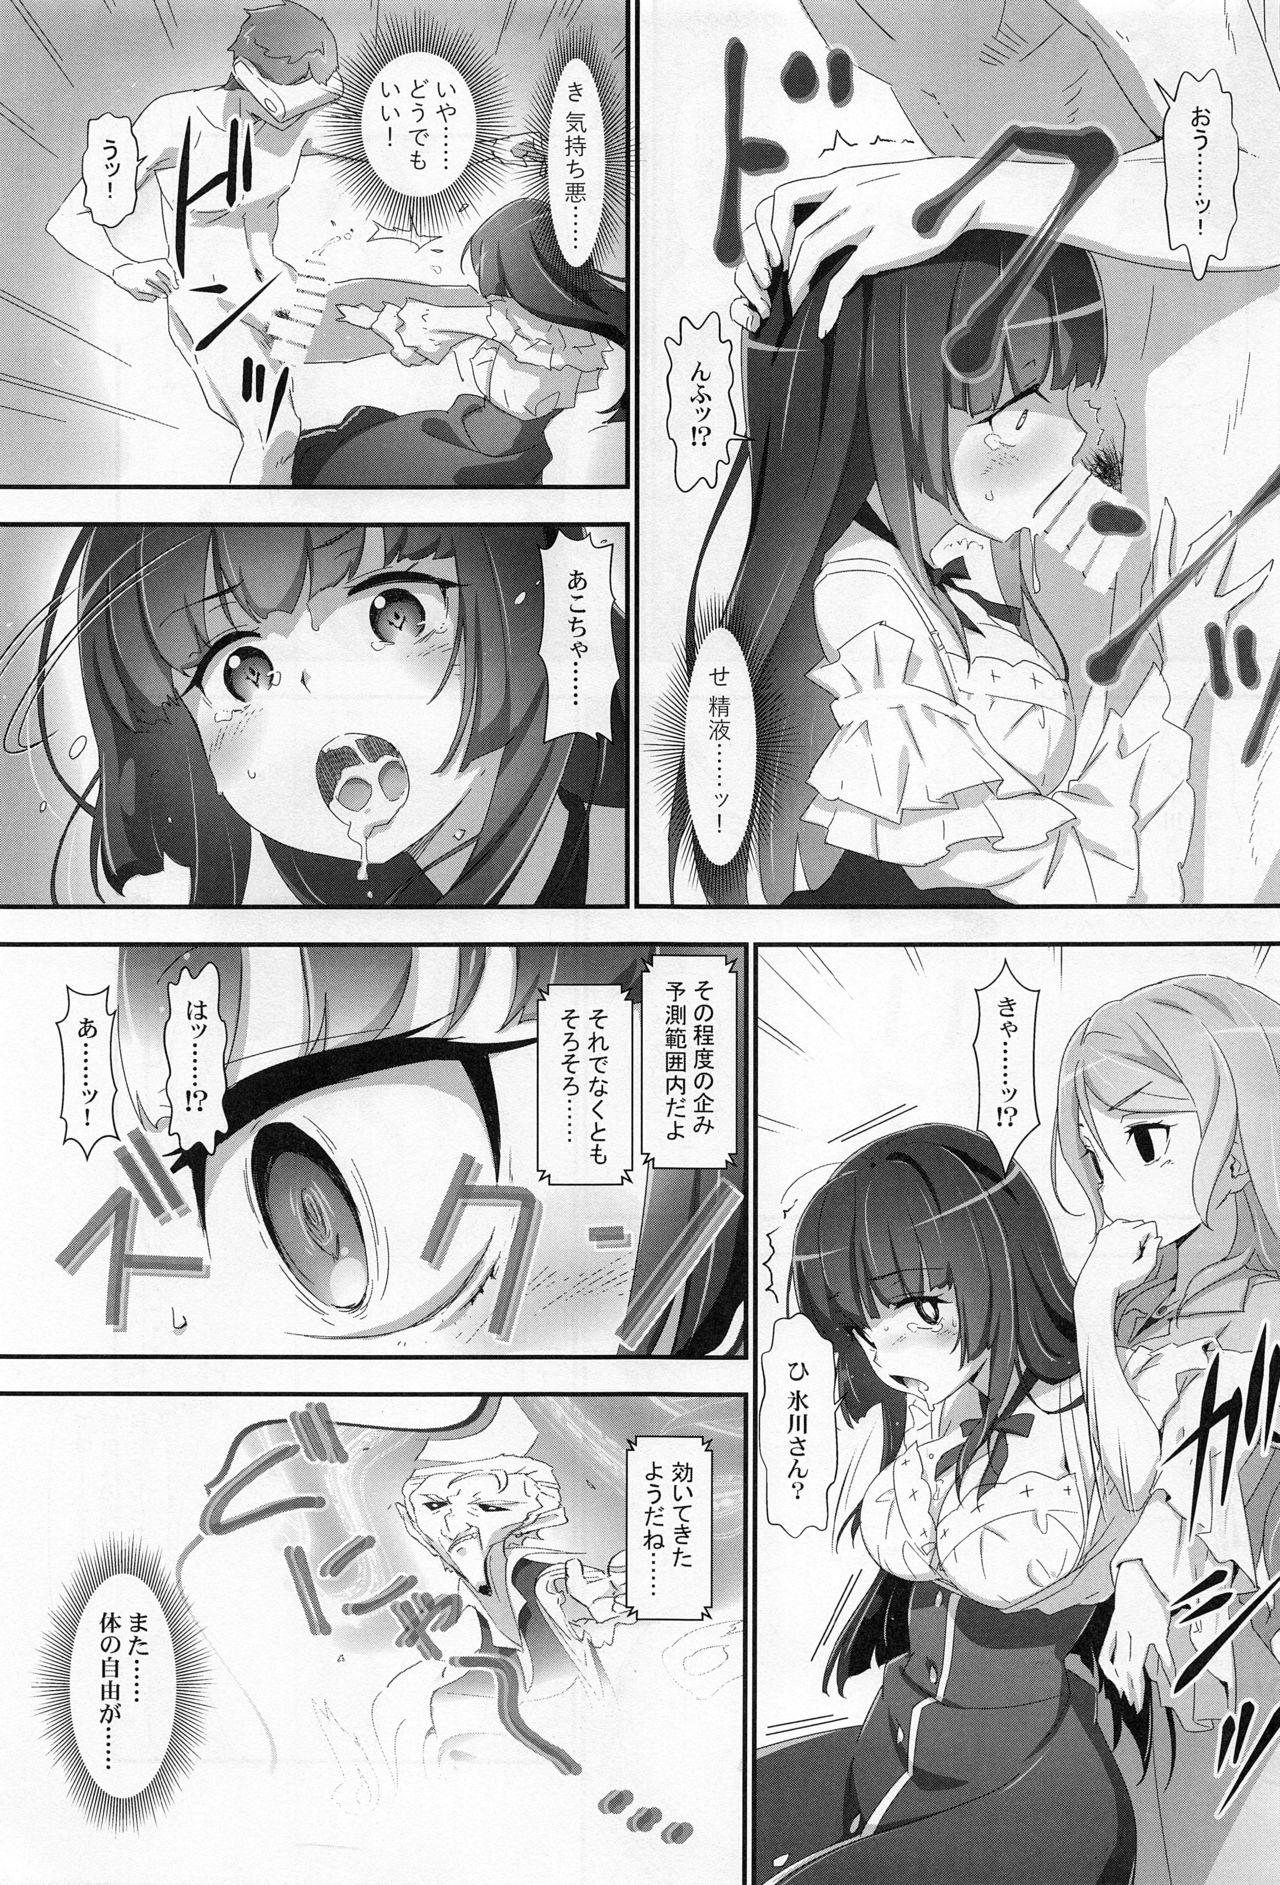 Funny EroYoro? 9 - Bang dream Old - Page 12